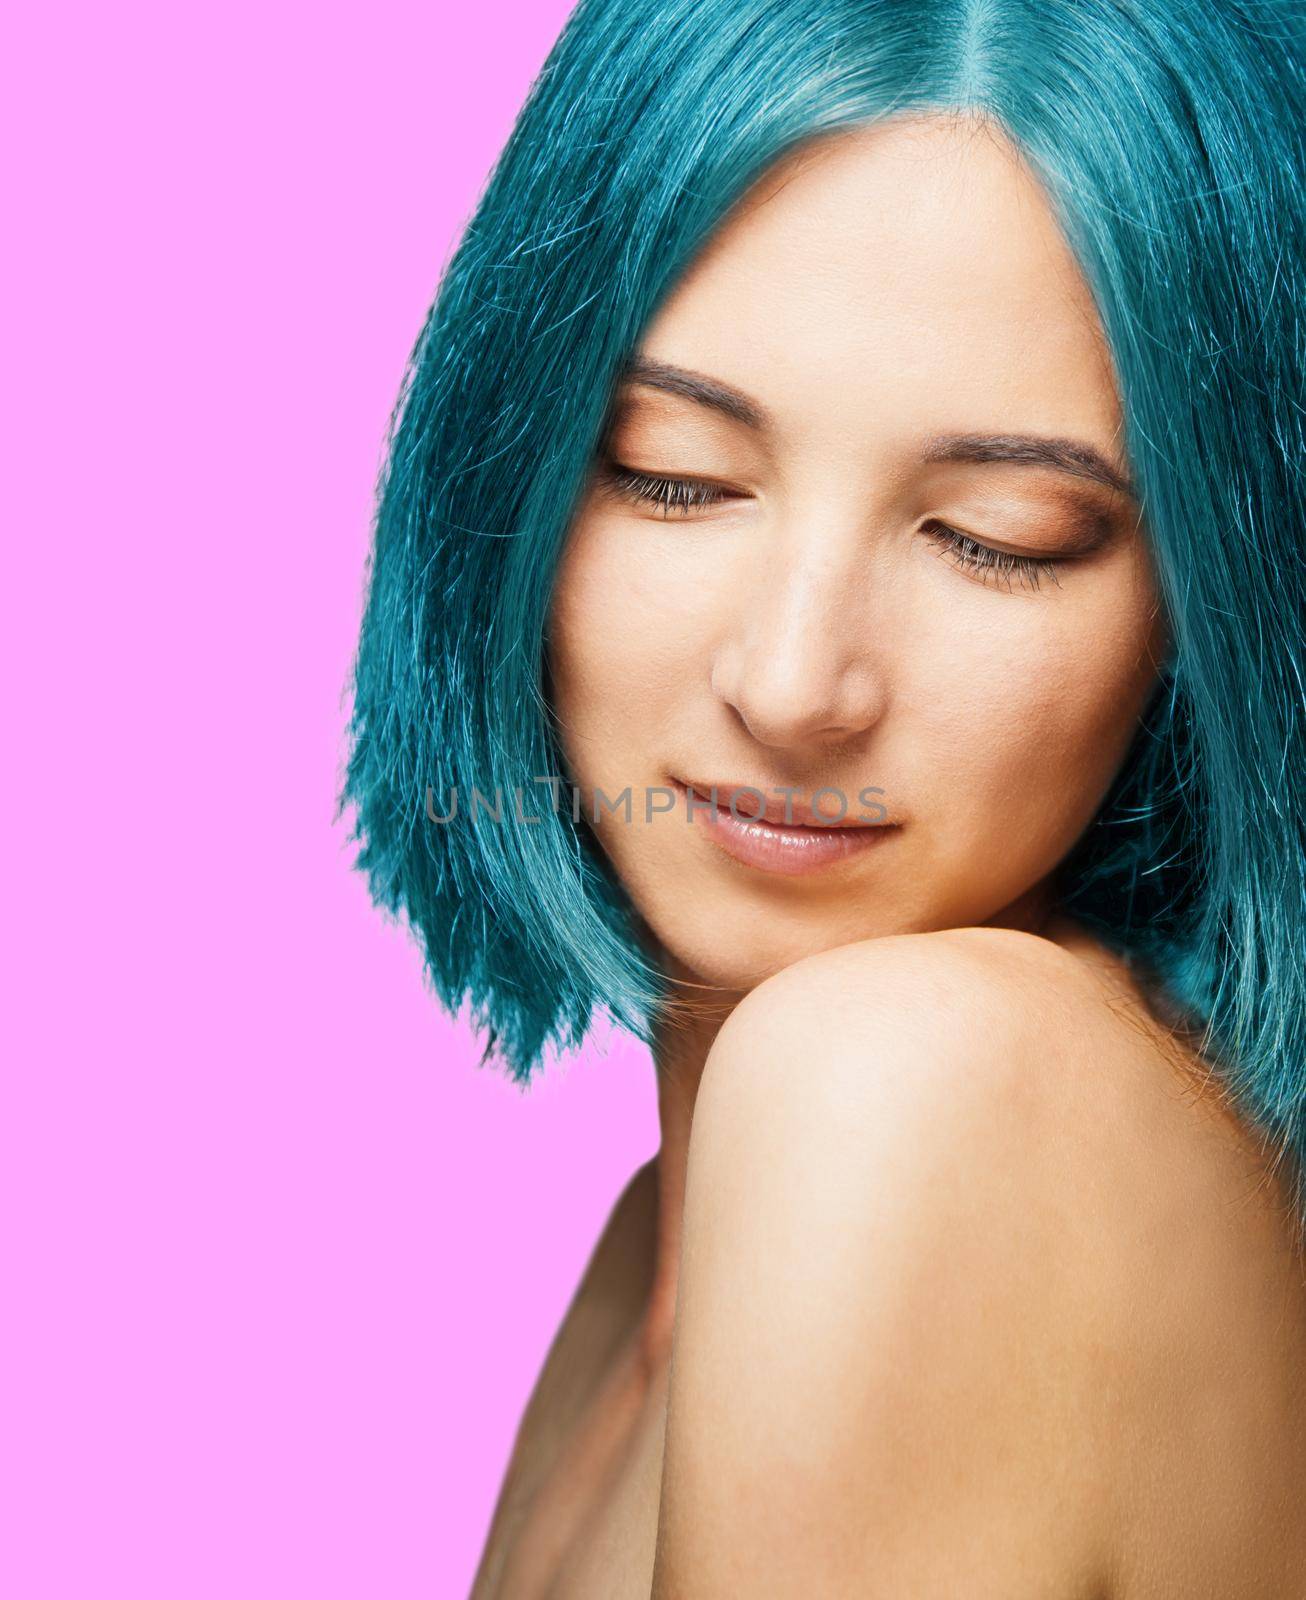 Attractive woman with blue hairstyle by alexAleksei